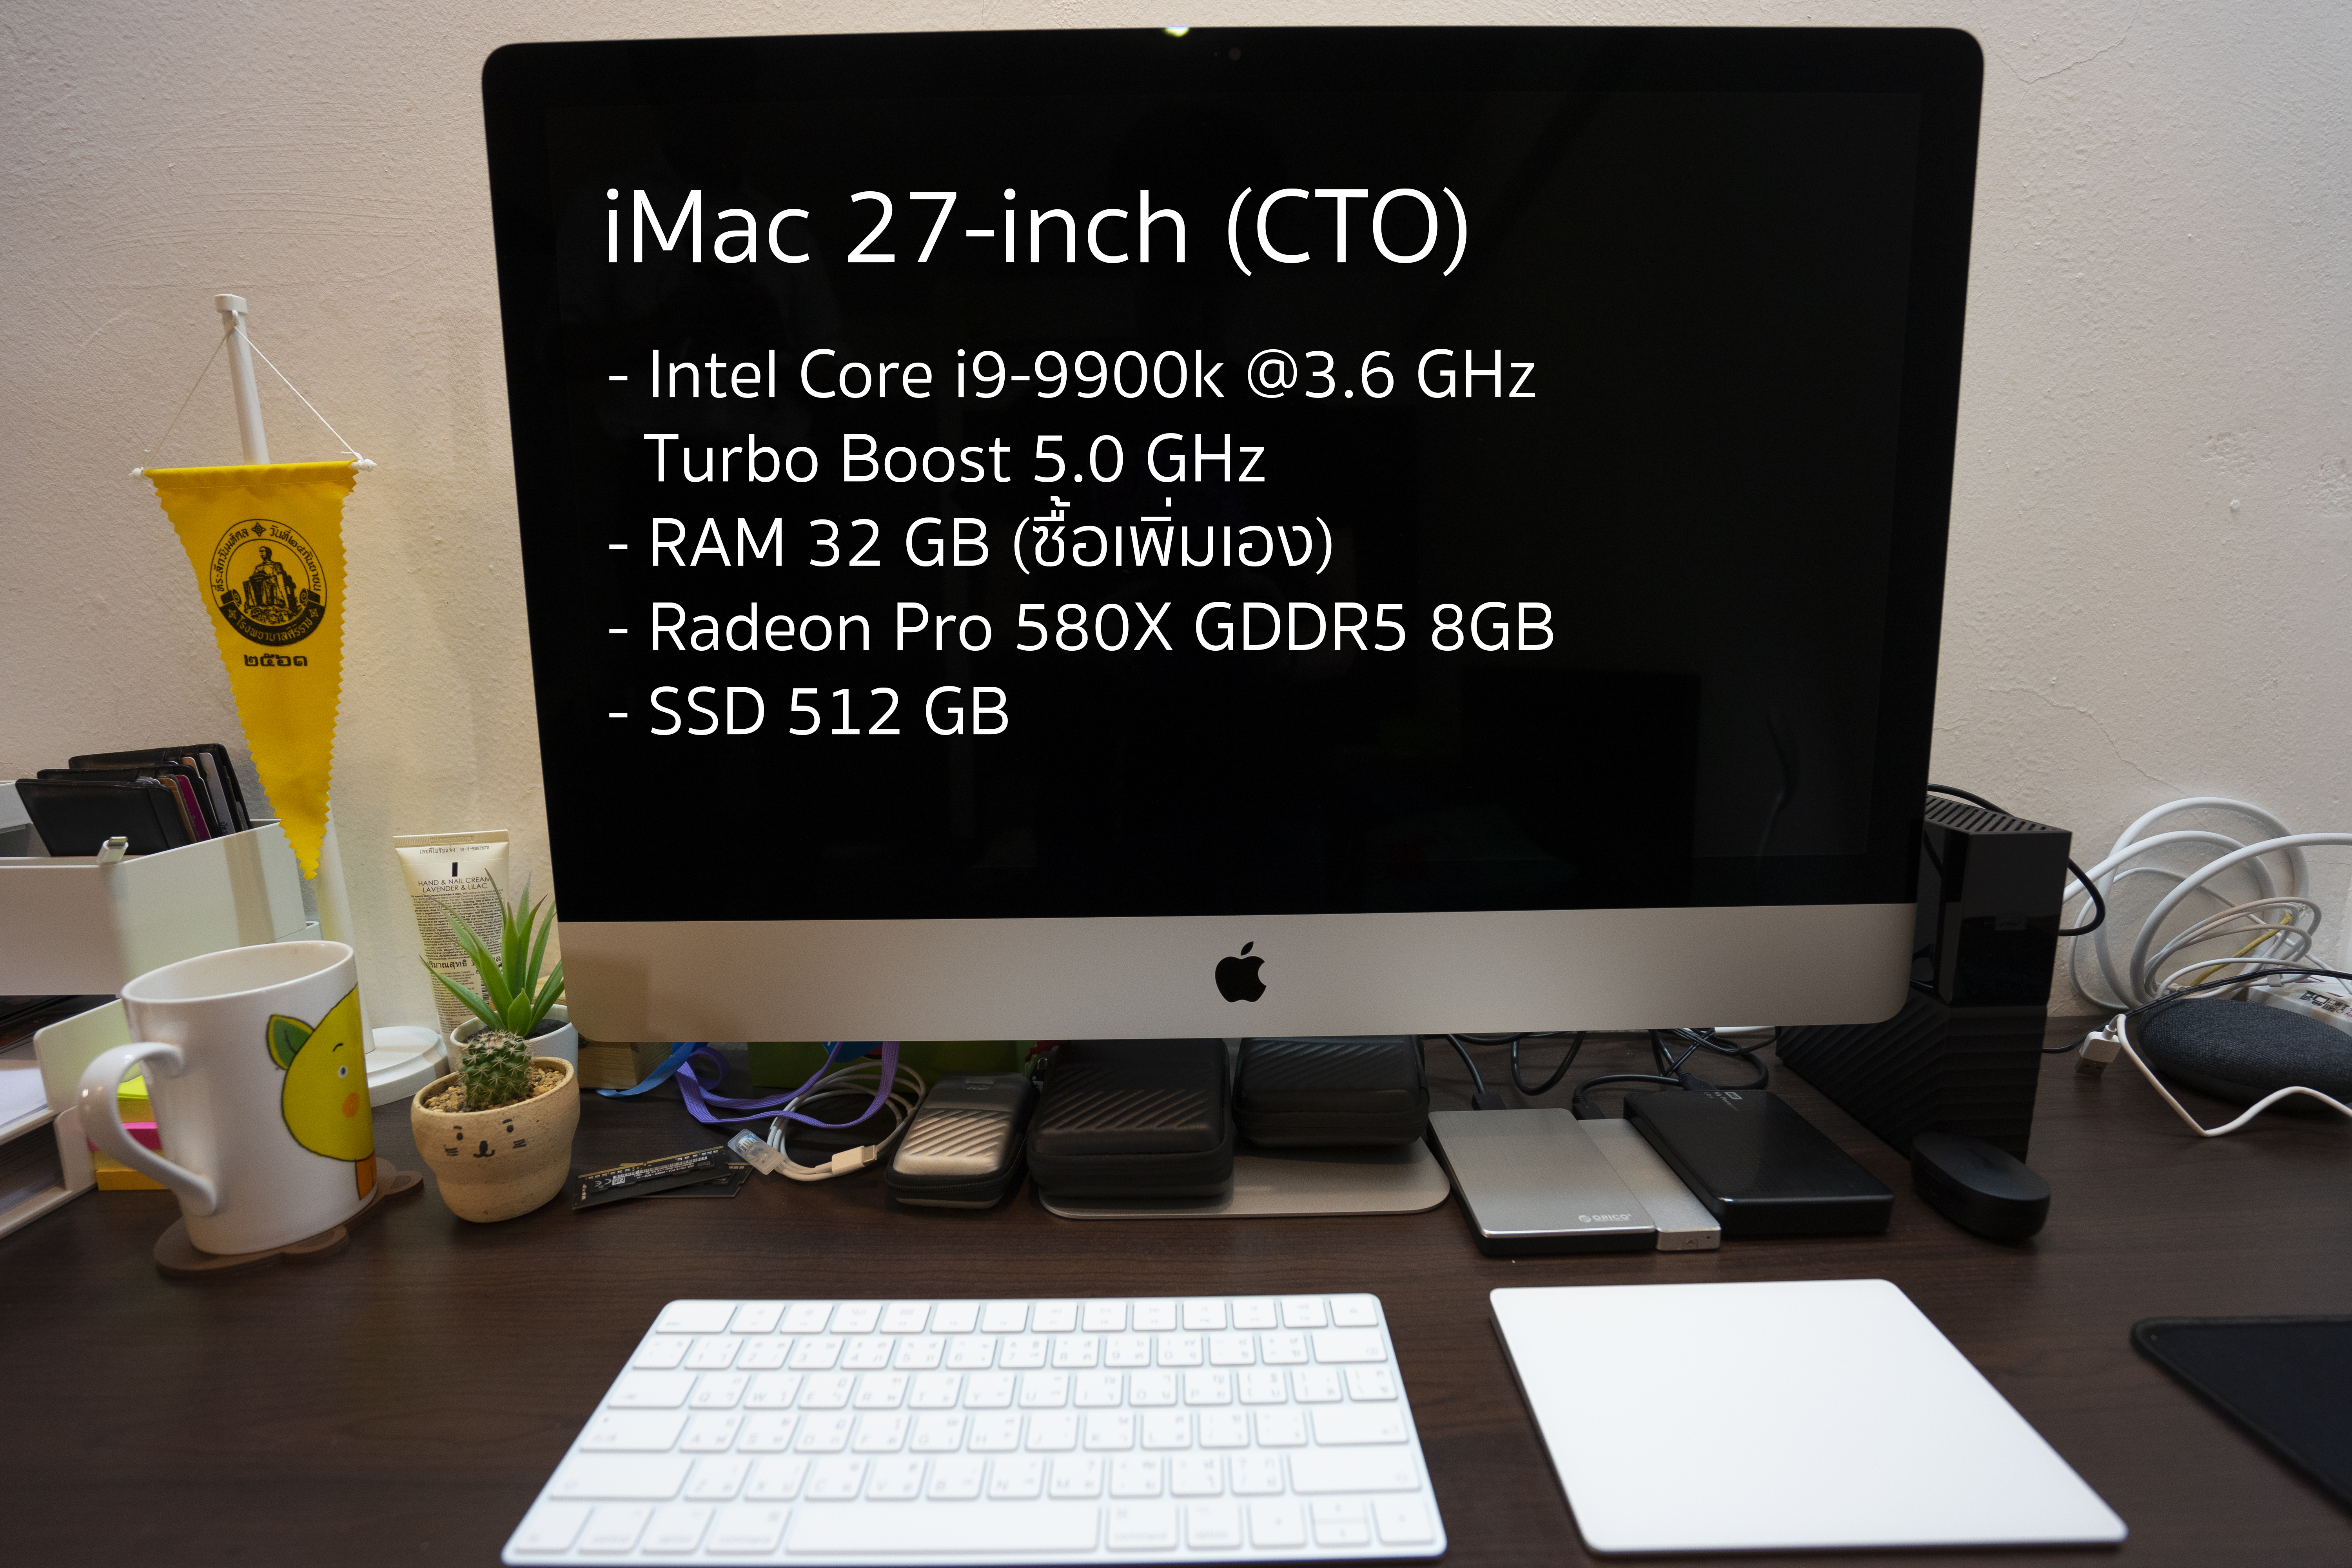 iMac 27-inch Specification